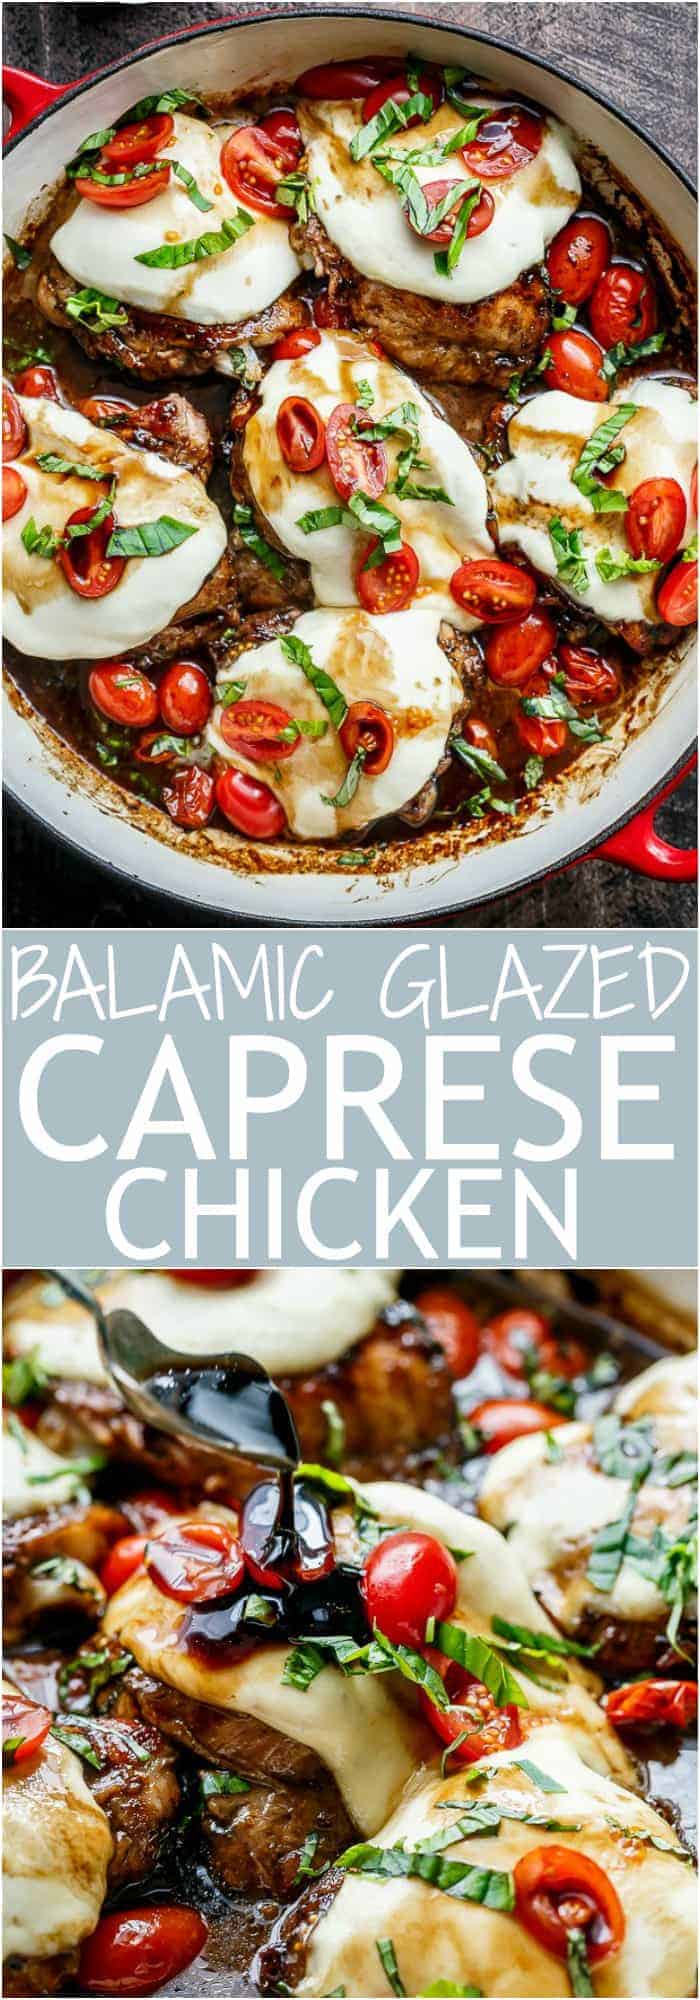 Caprese Chicken cooked right in a sweet, garlic balsamic glaze with juicy cherry tomatoes, fresh basil and topped with melted mozzarella cheese! | https://cafedelites.com